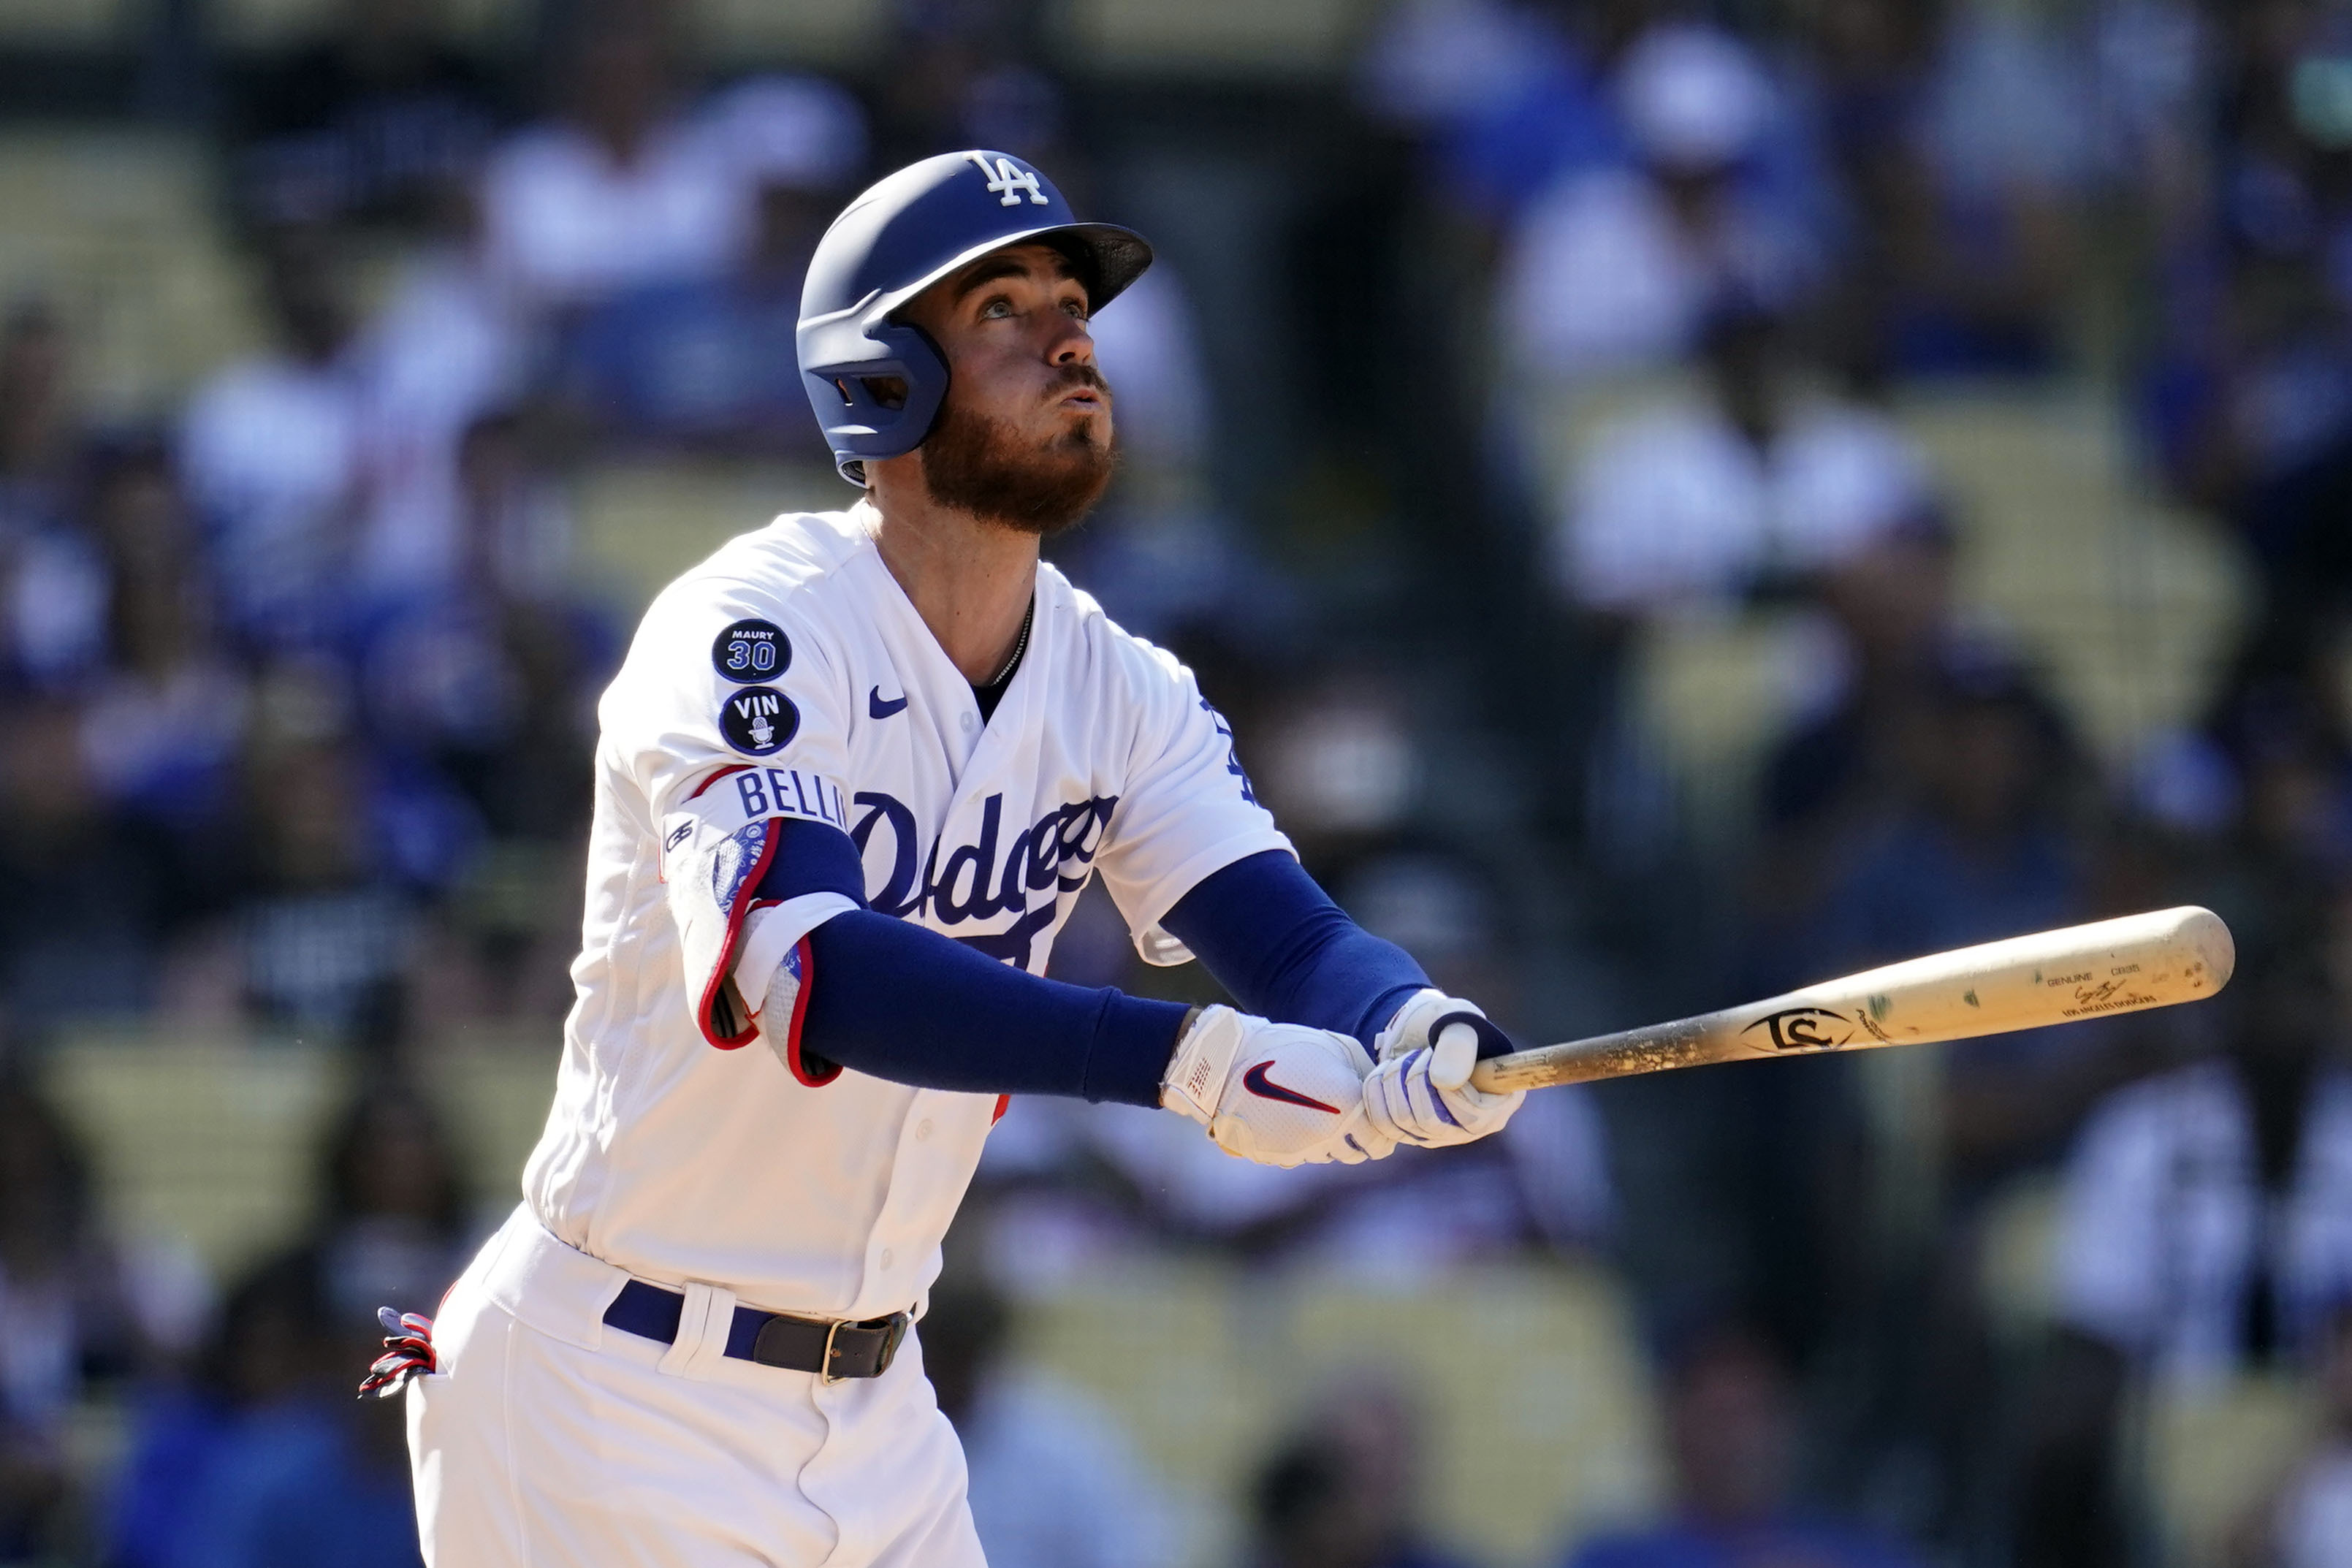 Cody Bellinger, Chicago Cubs agree on 1-year, $17.5 million deal